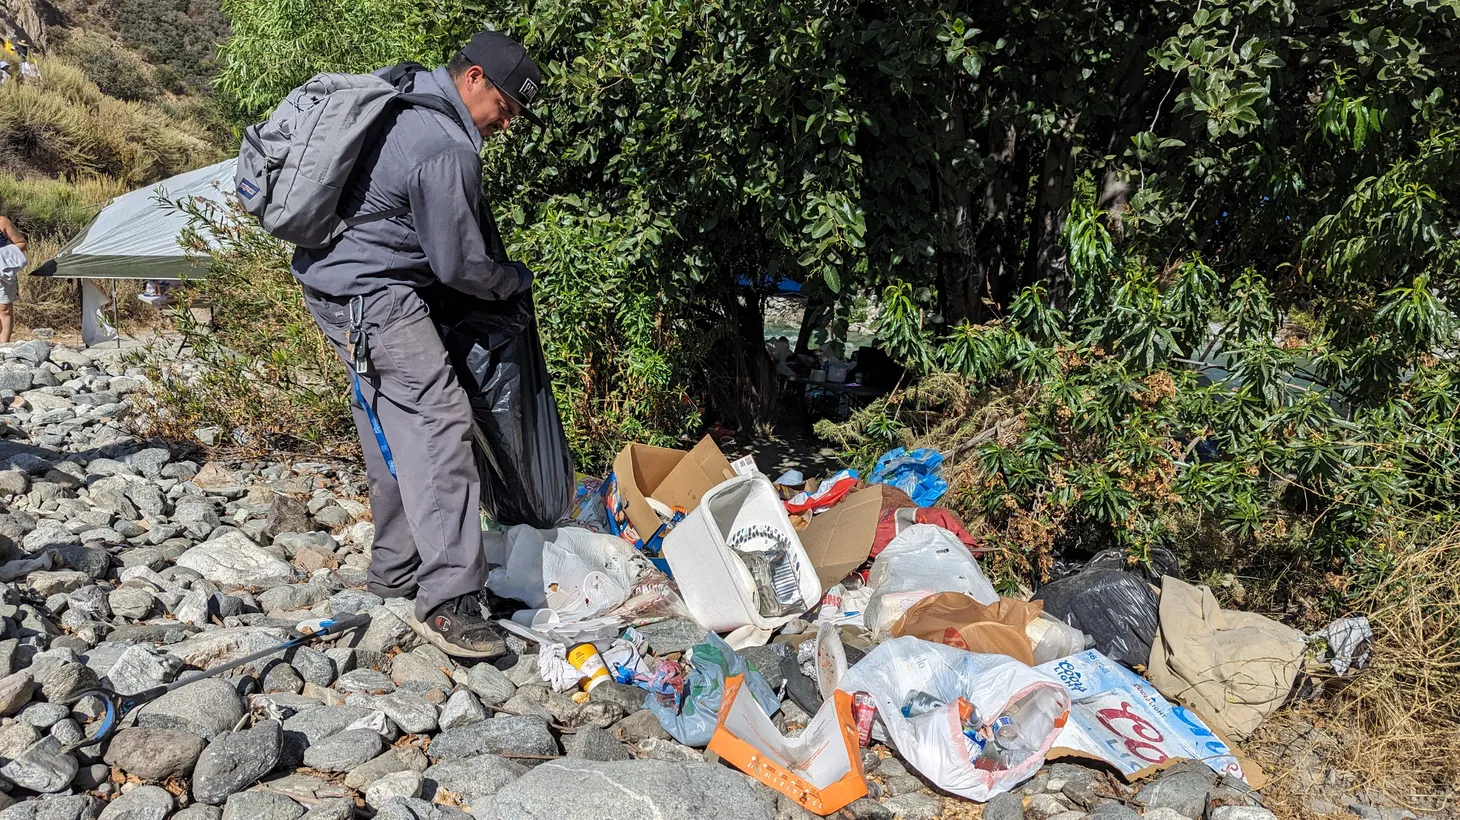 Volunteers with the Canyon City Environmental project have been struggling to manage larger and larger piles of trash along the east fork of the San Gabriel River, as viral TikTok posts have drawn large crowds.